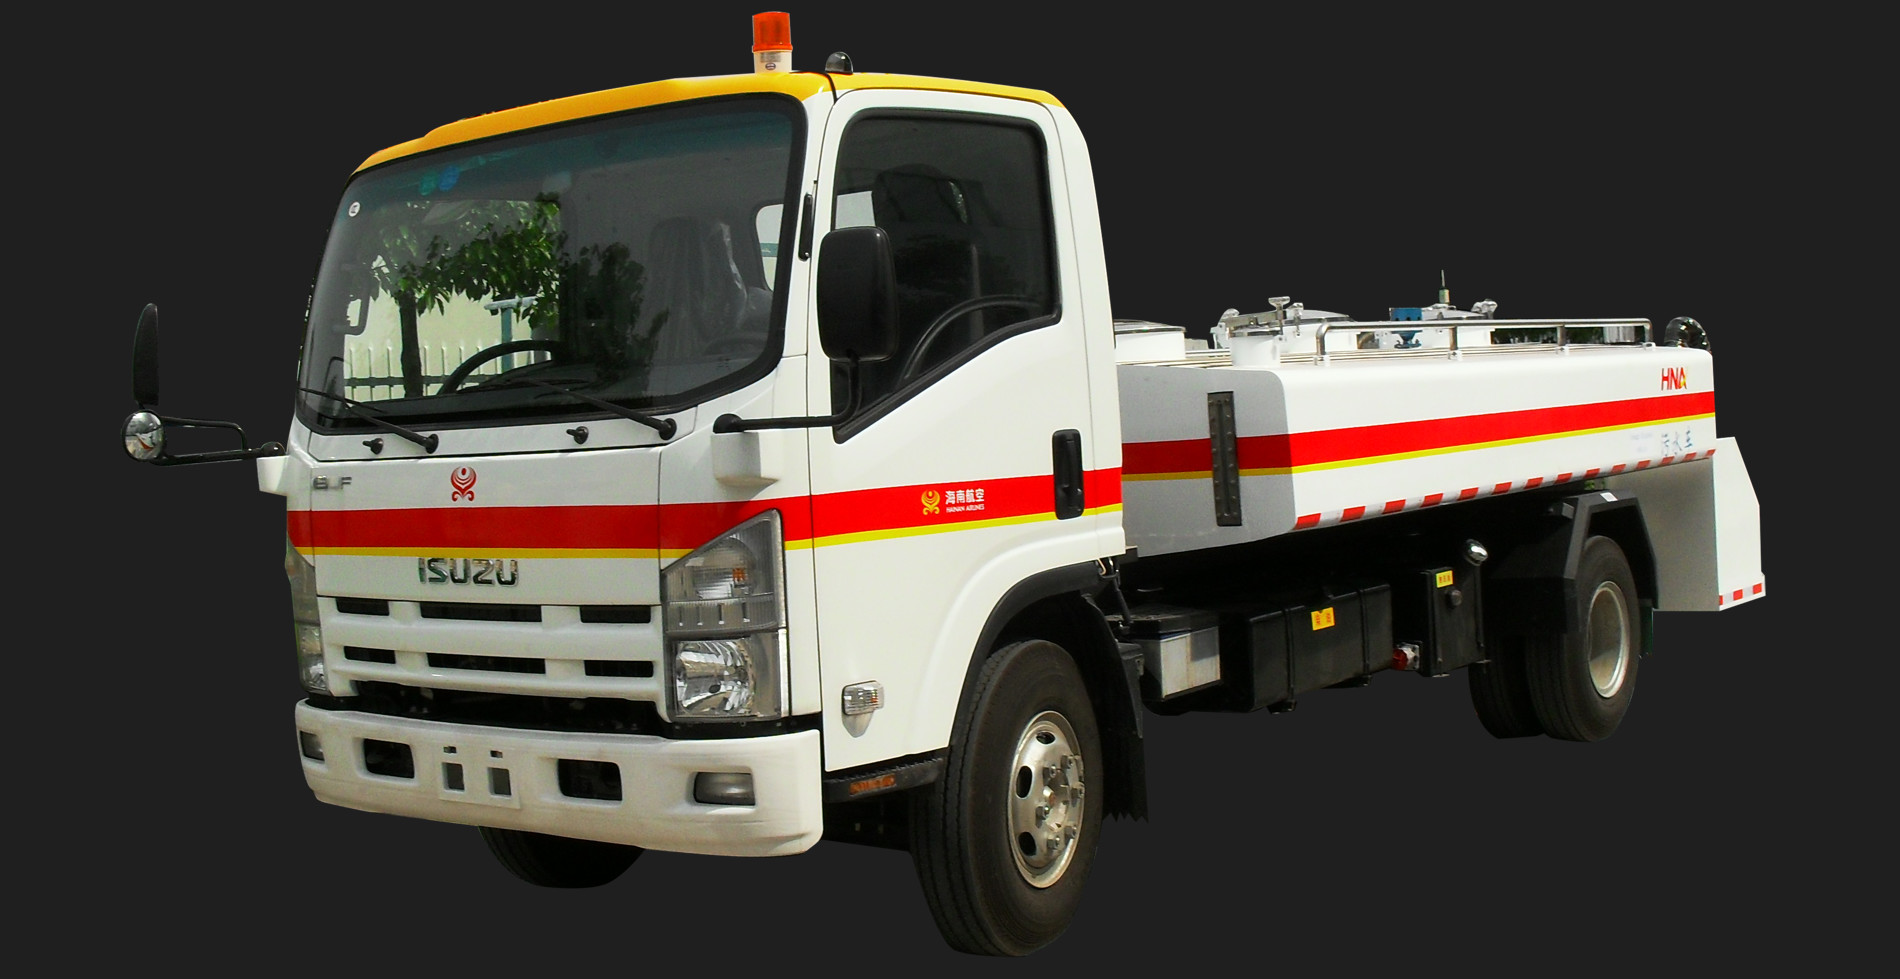 Buy cheap A310 Aircraft Lavatory Service Truck High Performance from wholesalers